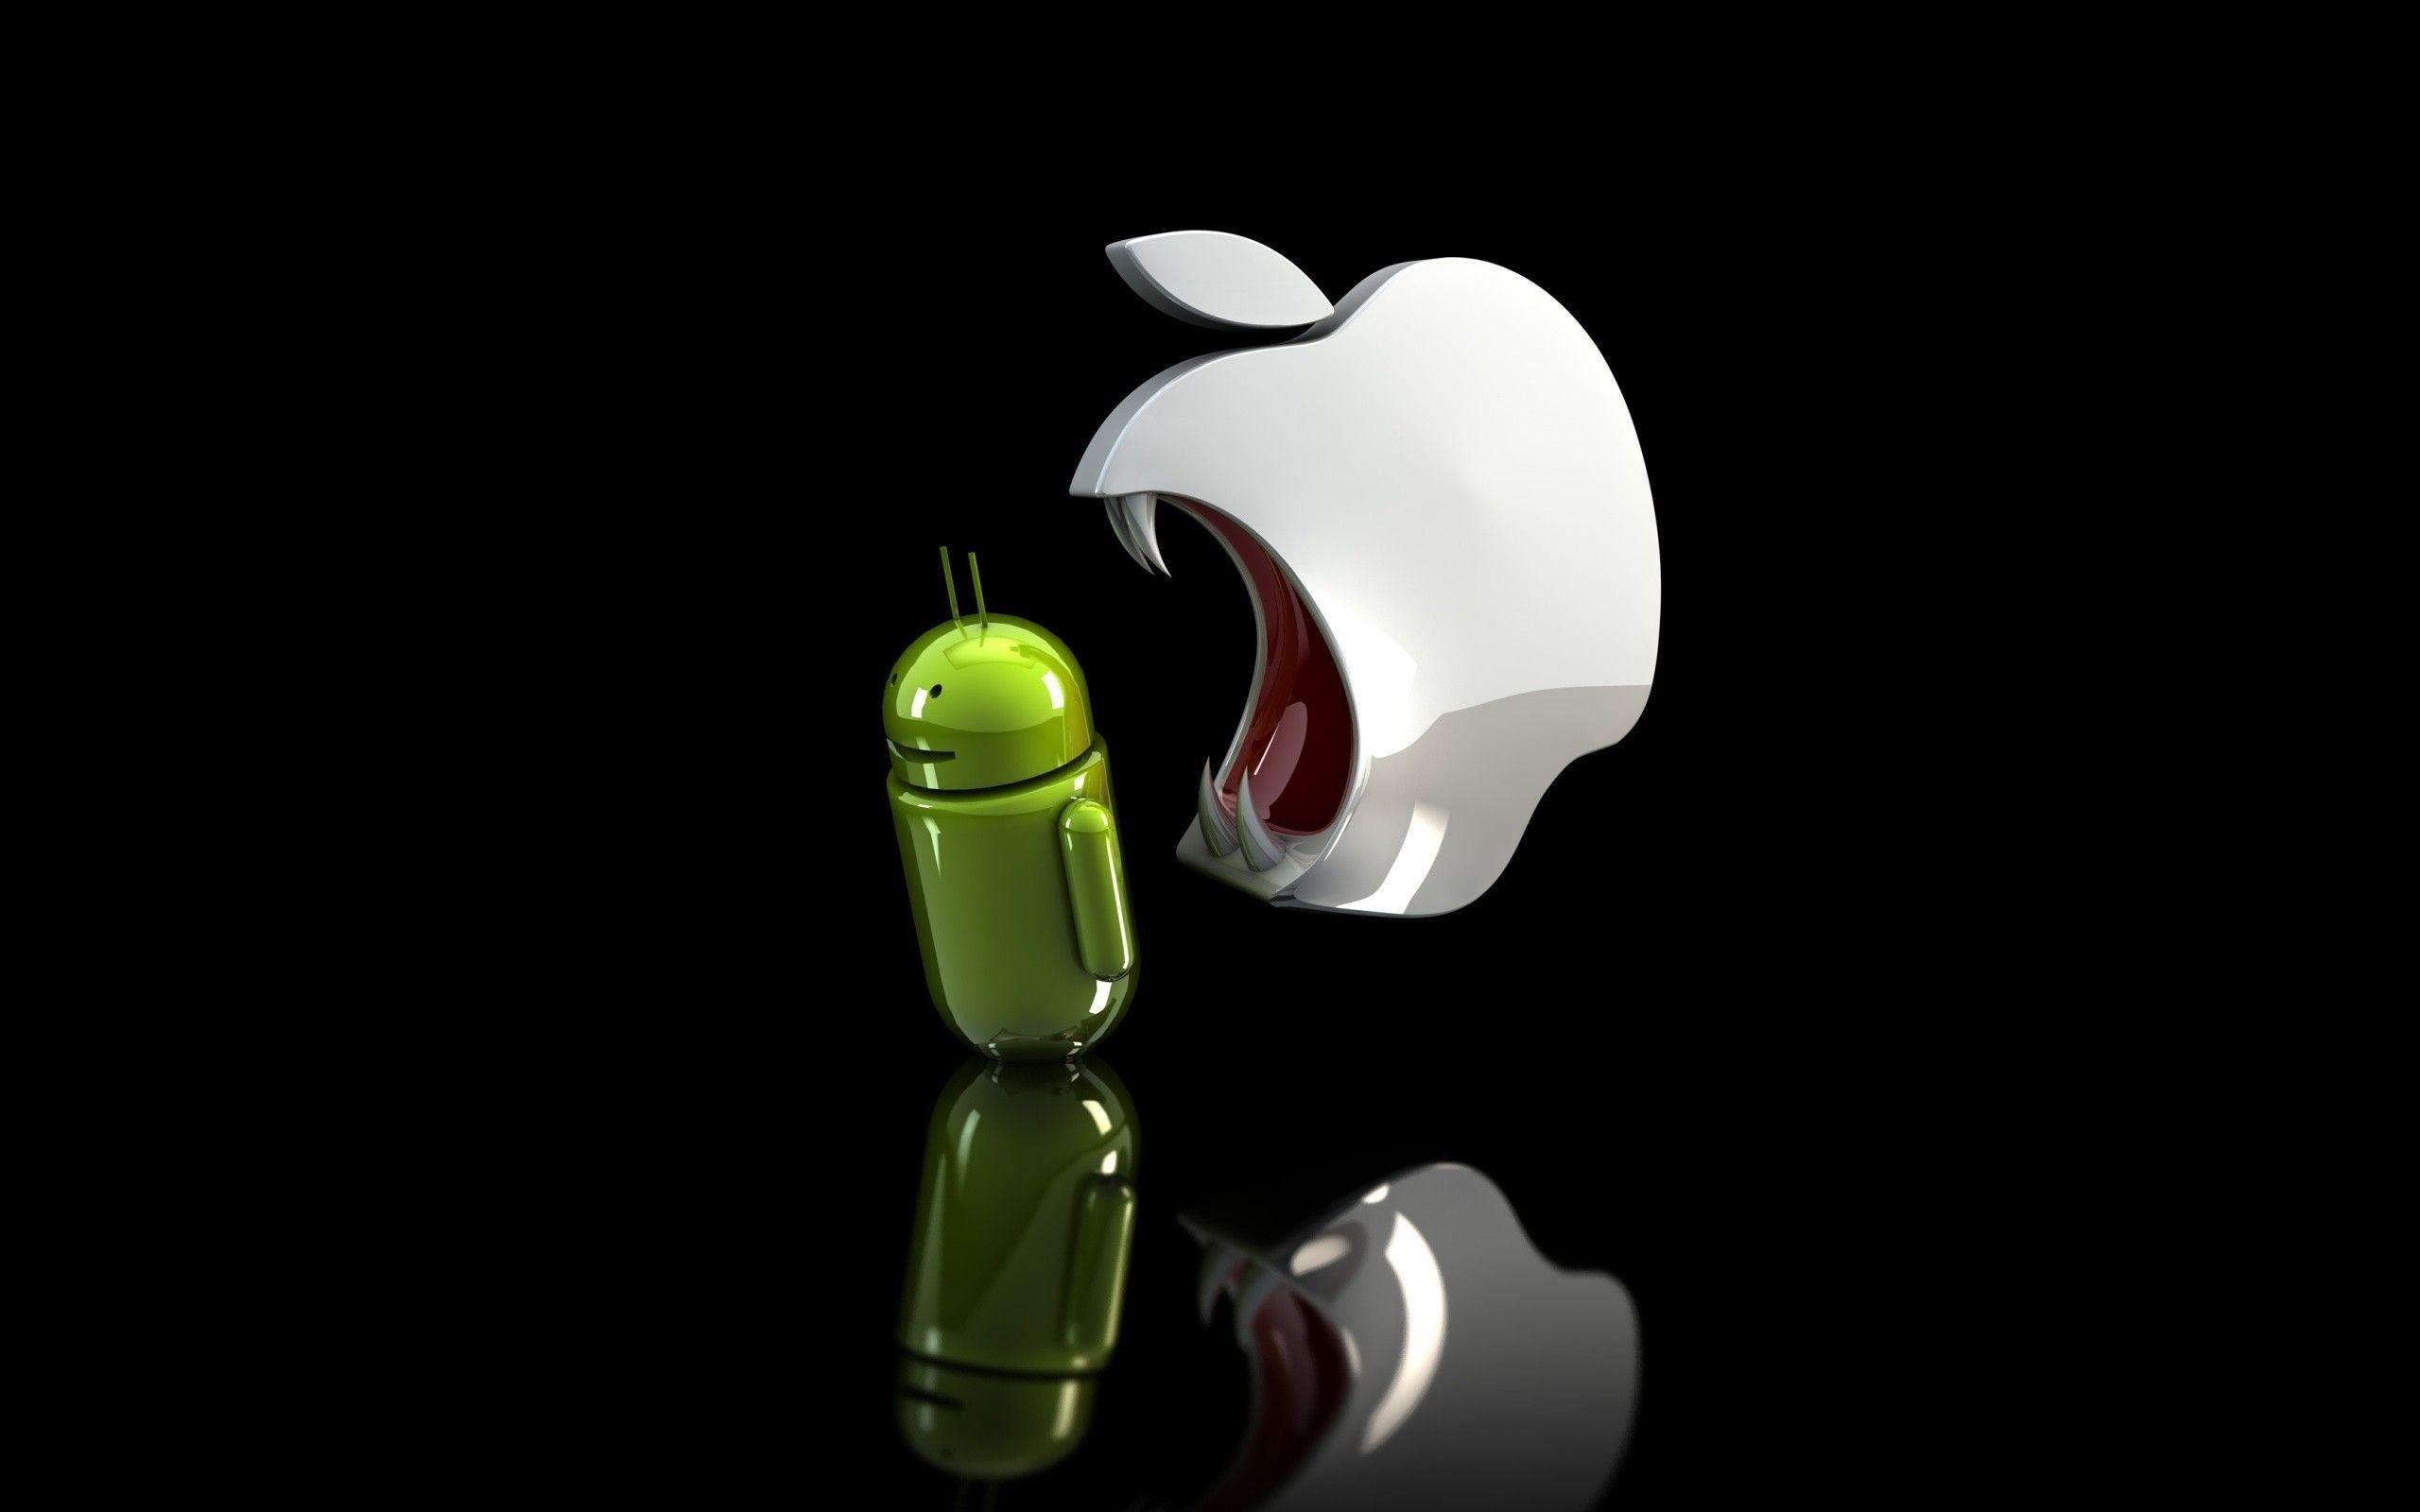 Apple Android Wallpaper Free Apple Android Background